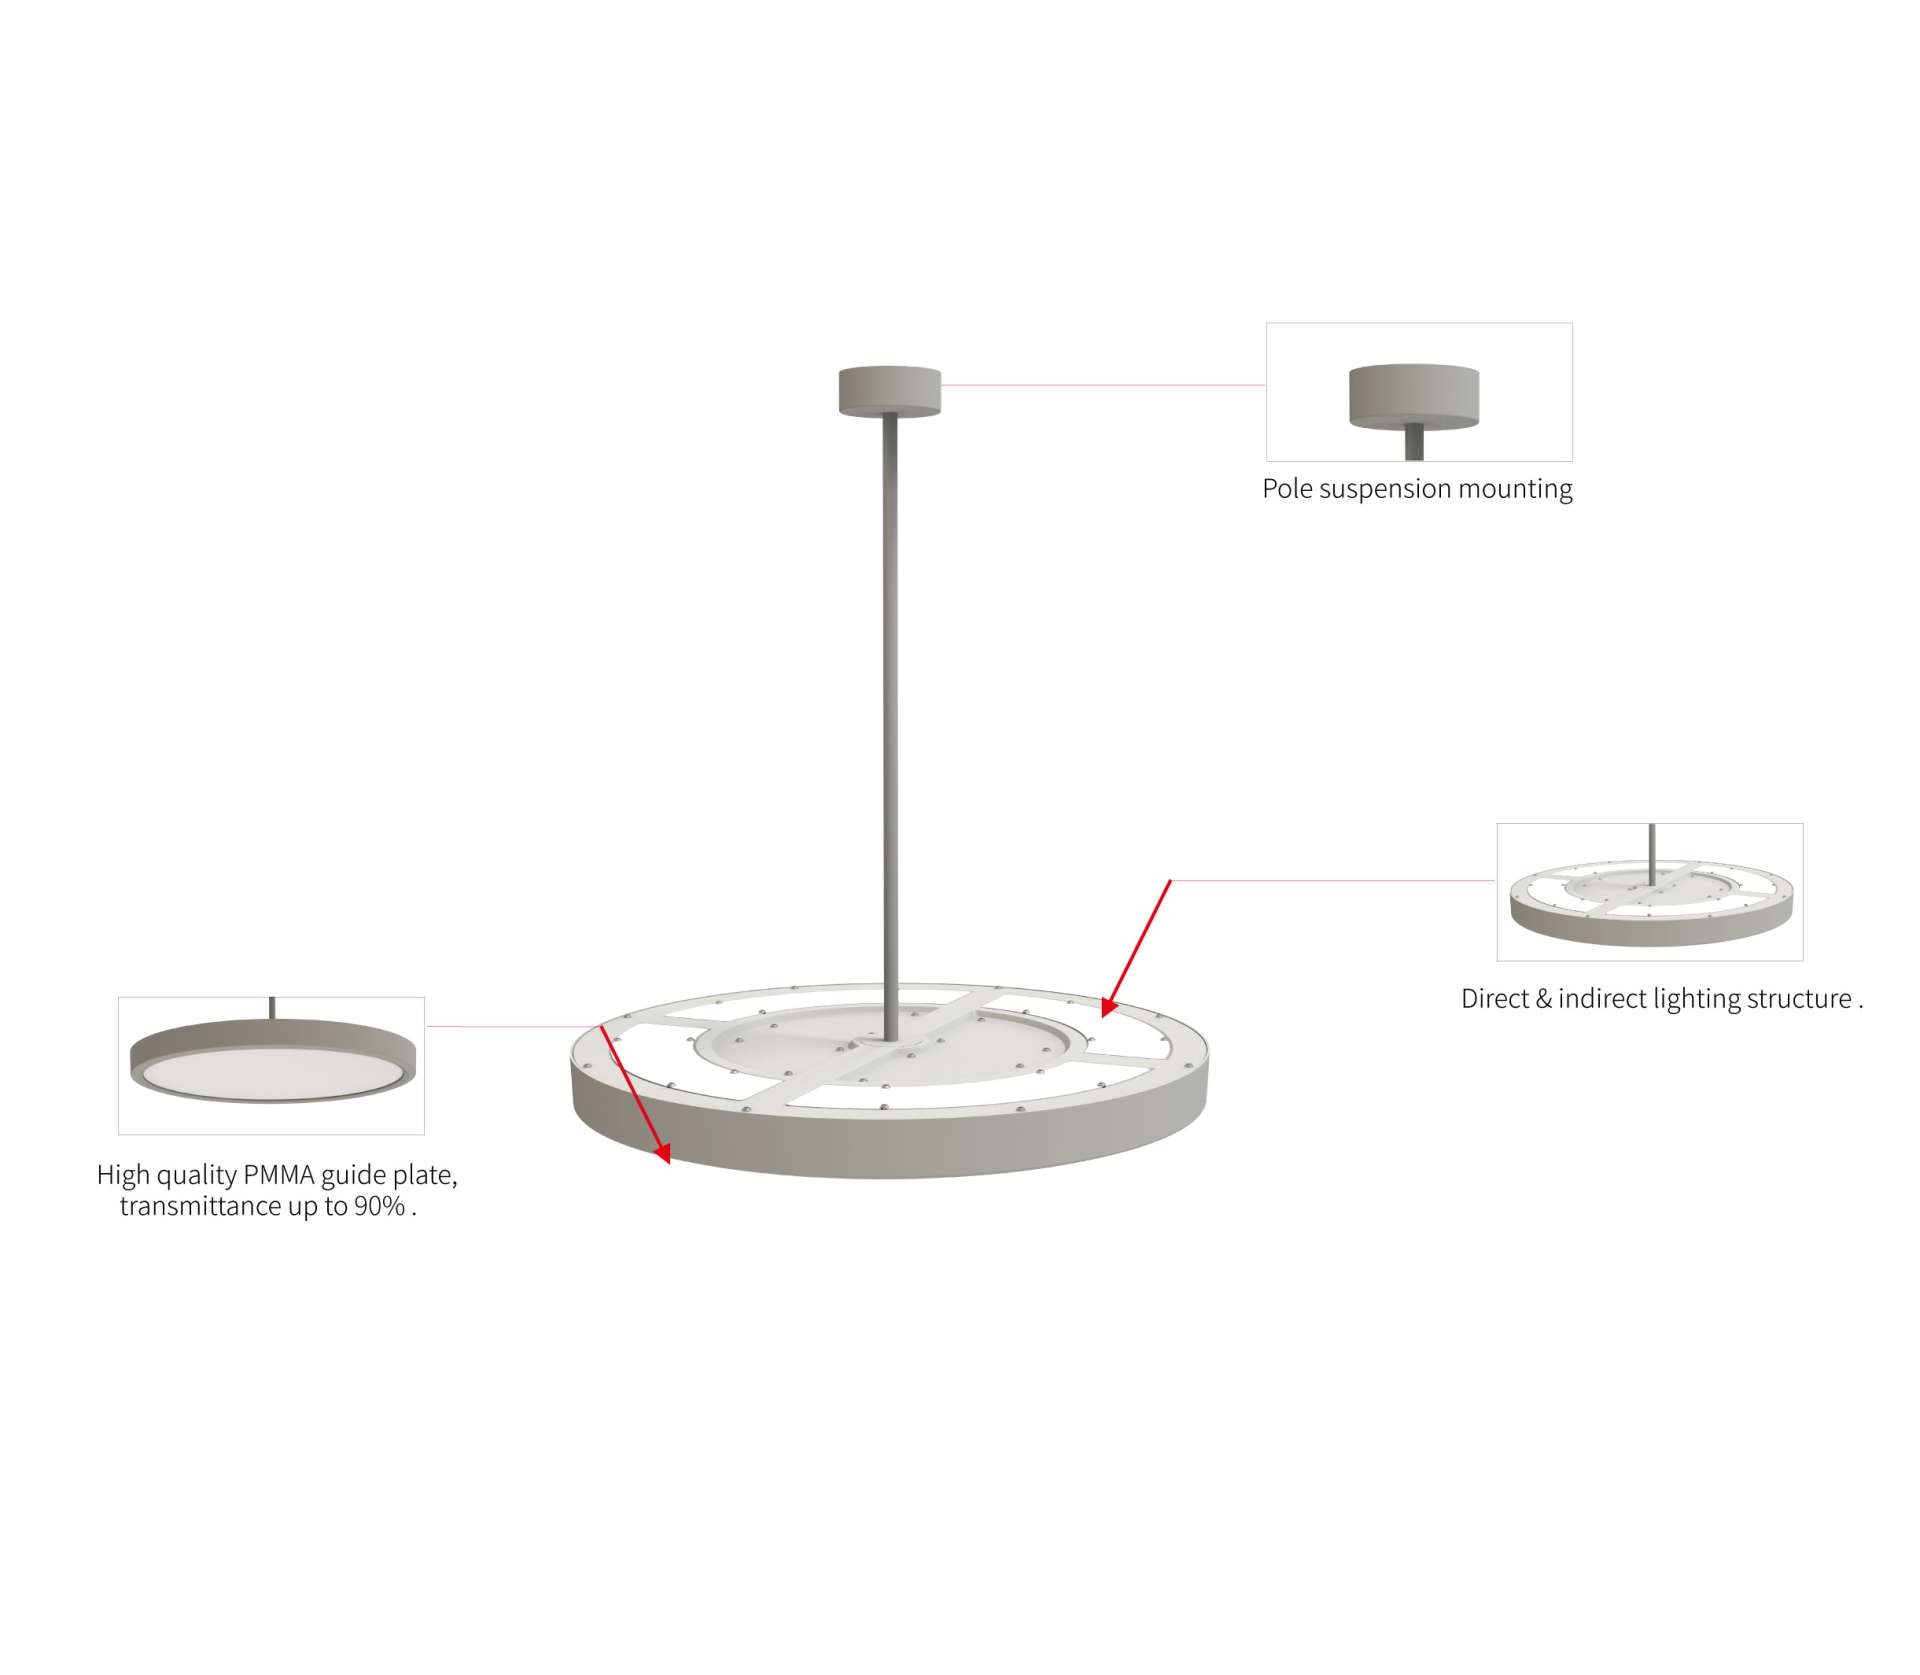 Nora-X Pole Suspension Mounting Round LED Panel Light Product Details